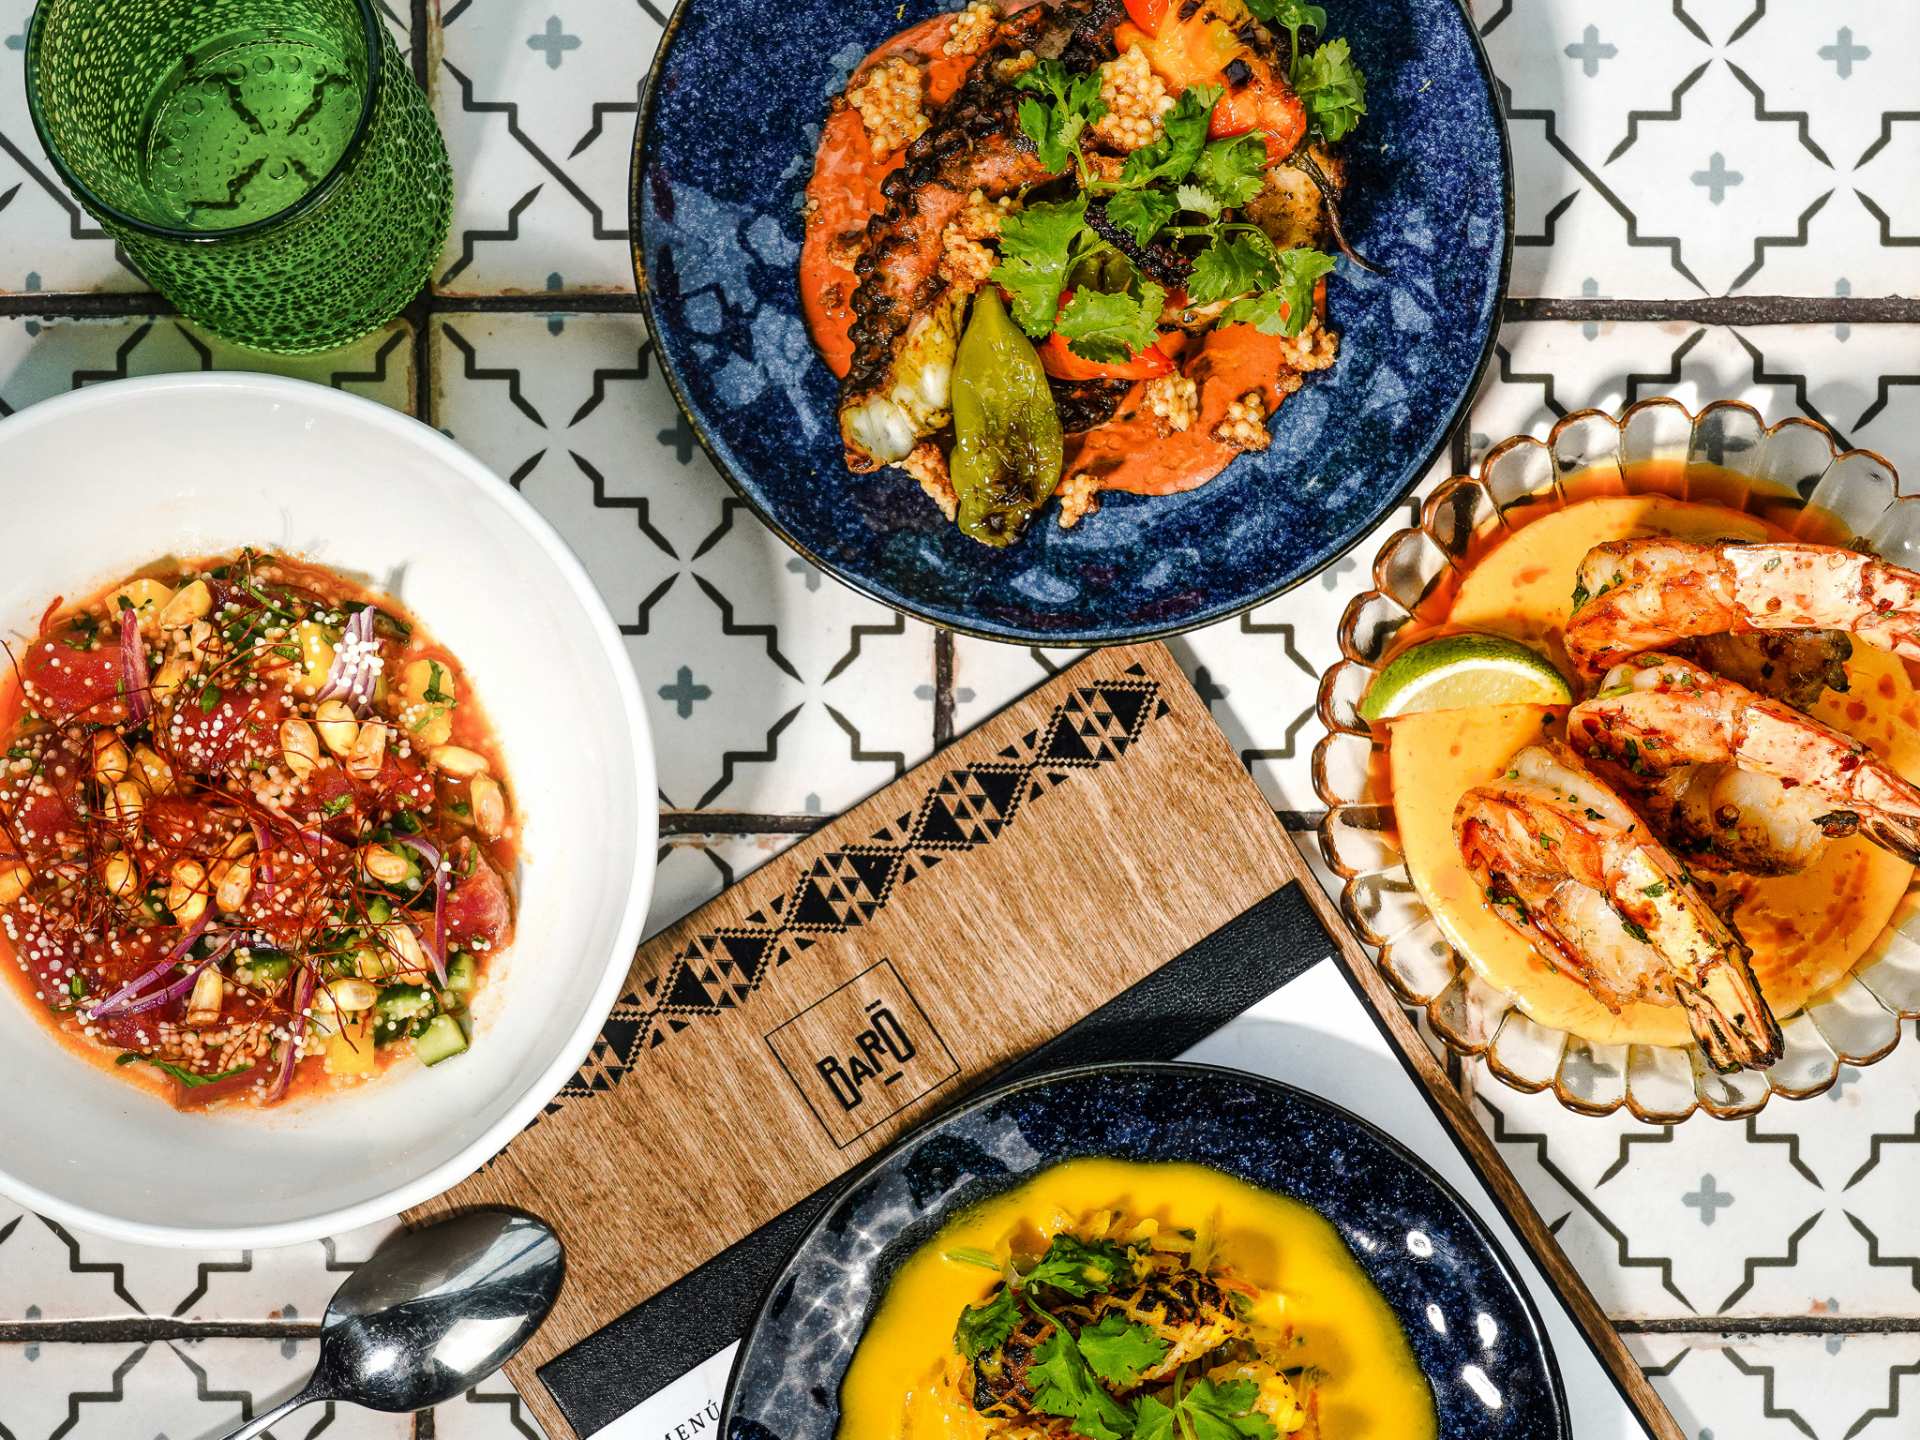 Summerlicious Toronto | A spread of dishes at Baro